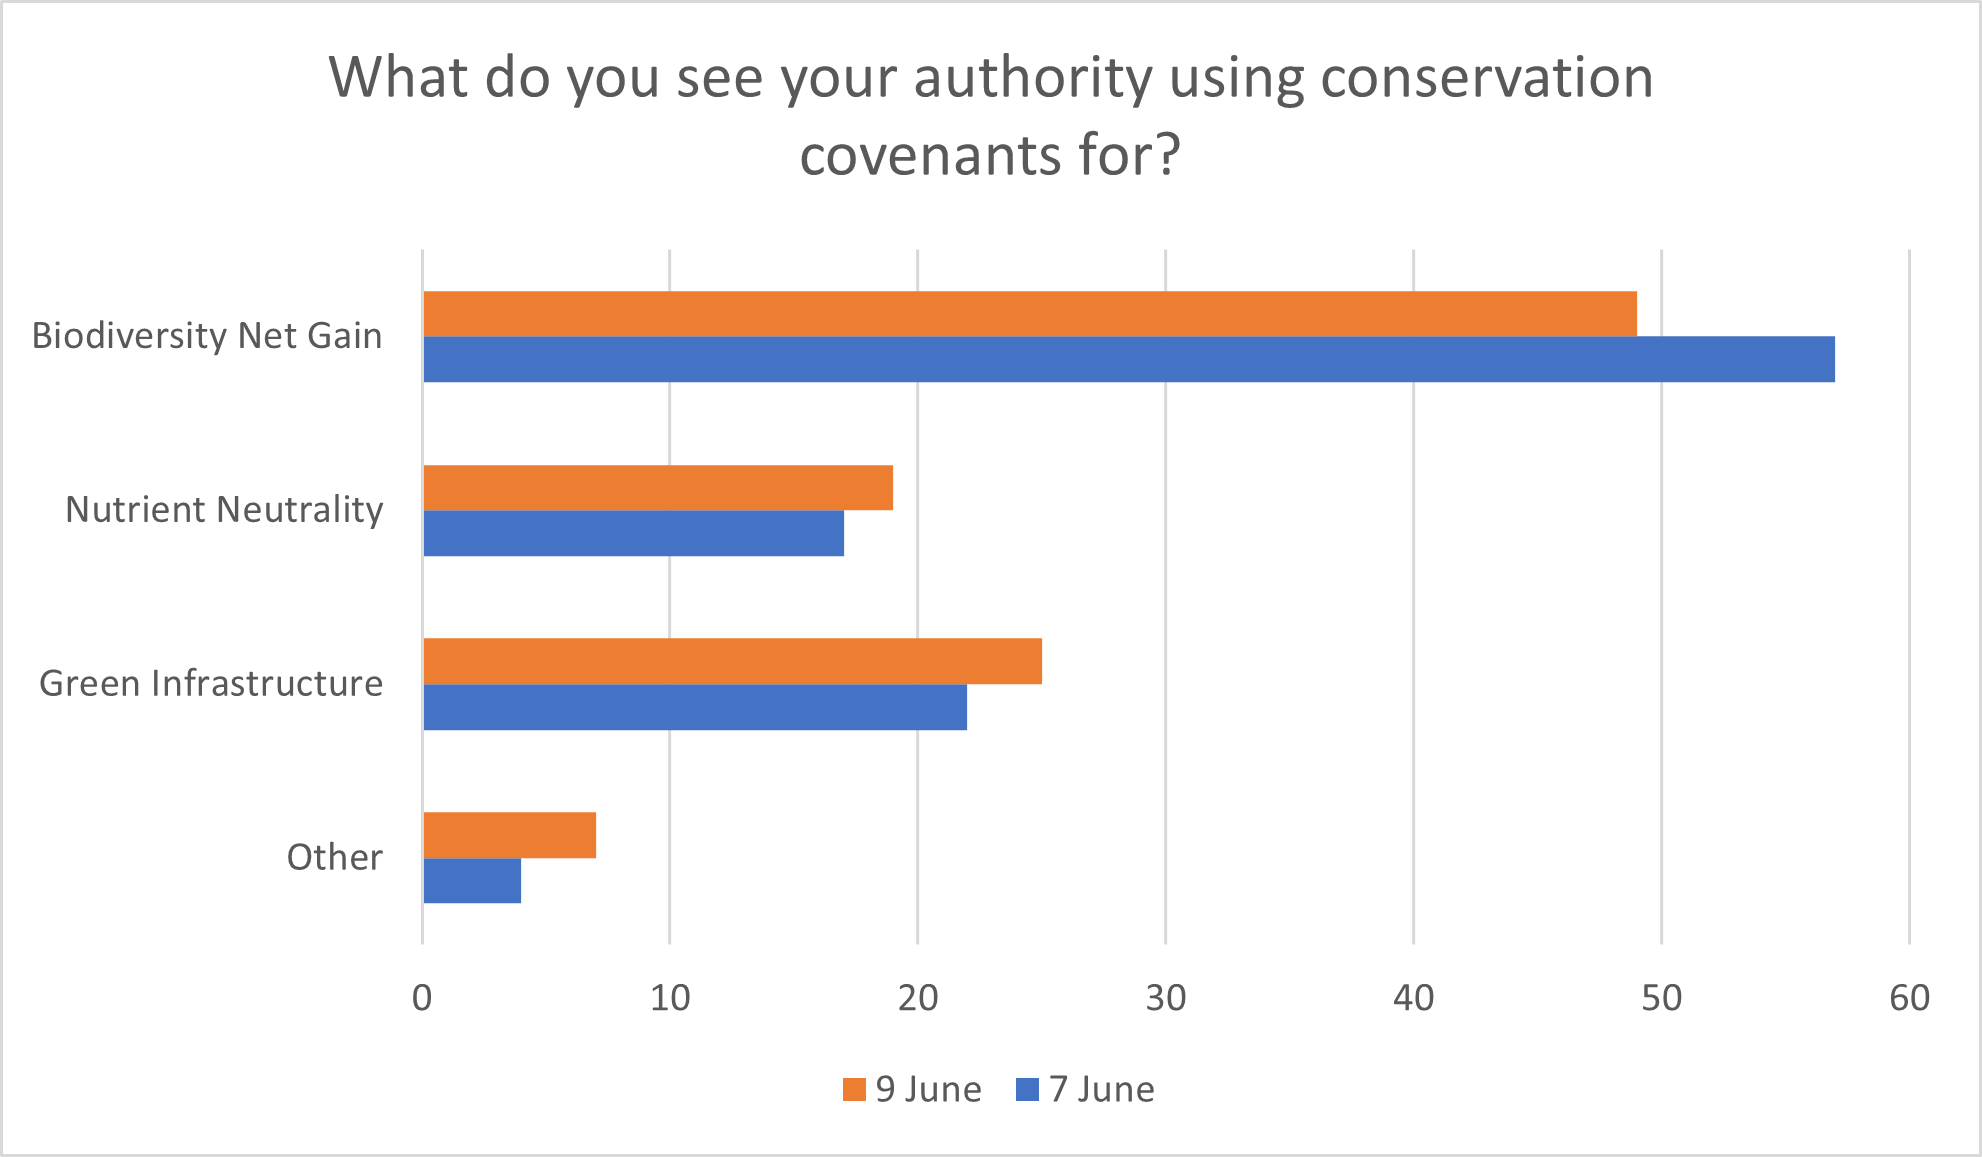 Poll 4 - What do you see your authority using conservation covenants for?